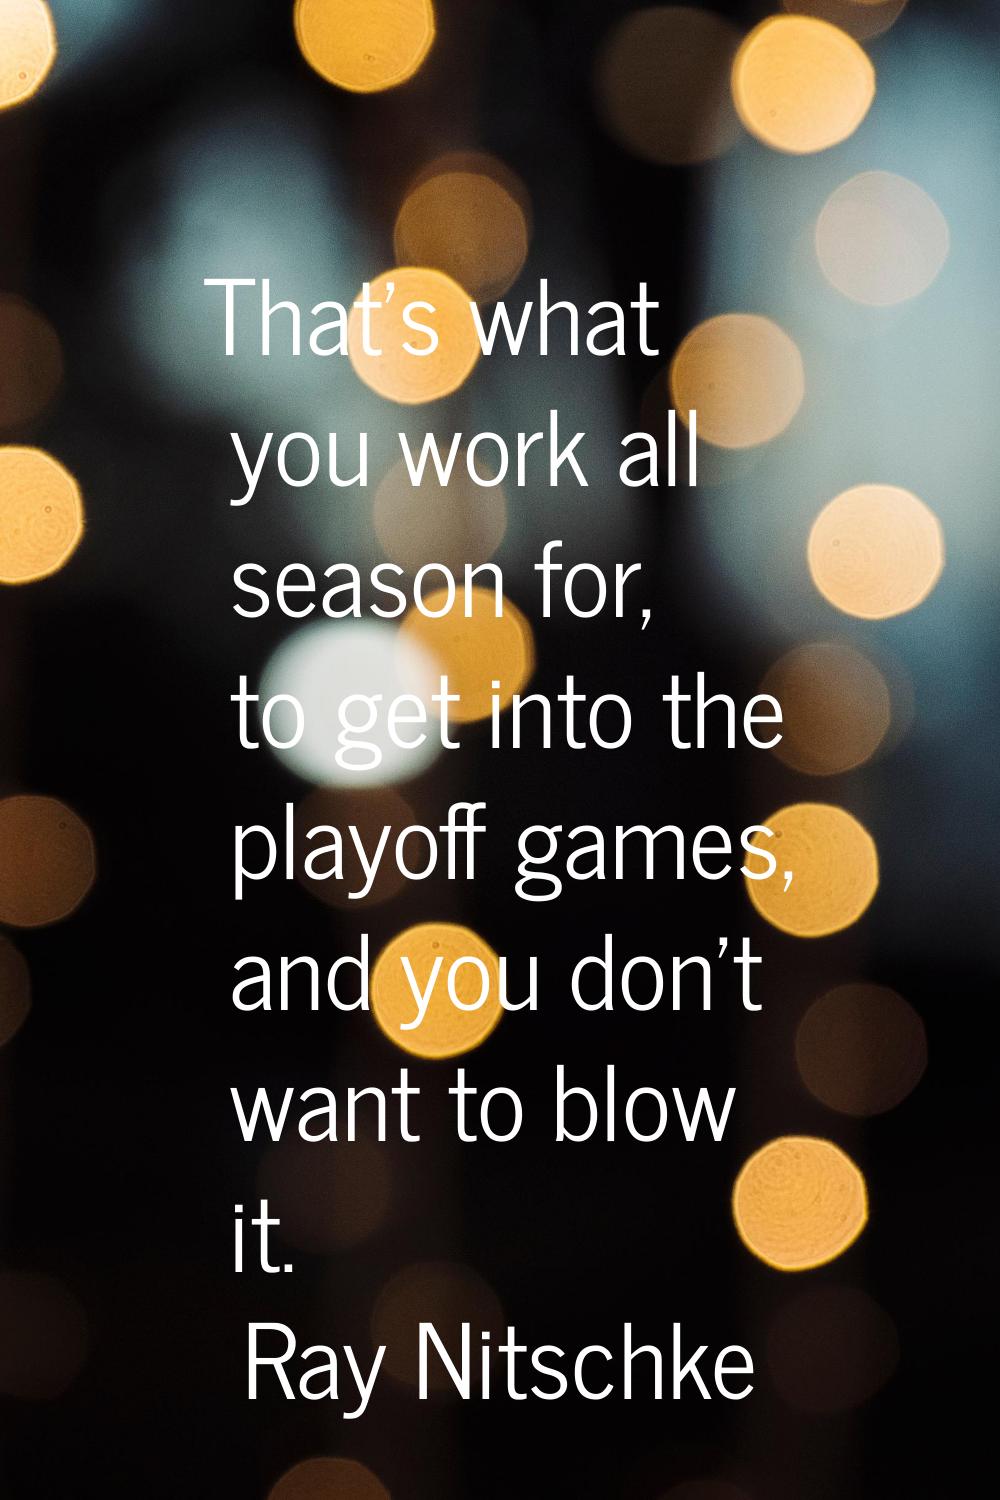 That's what you work all season for, to get into the playoff games, and you don't want to blow it.